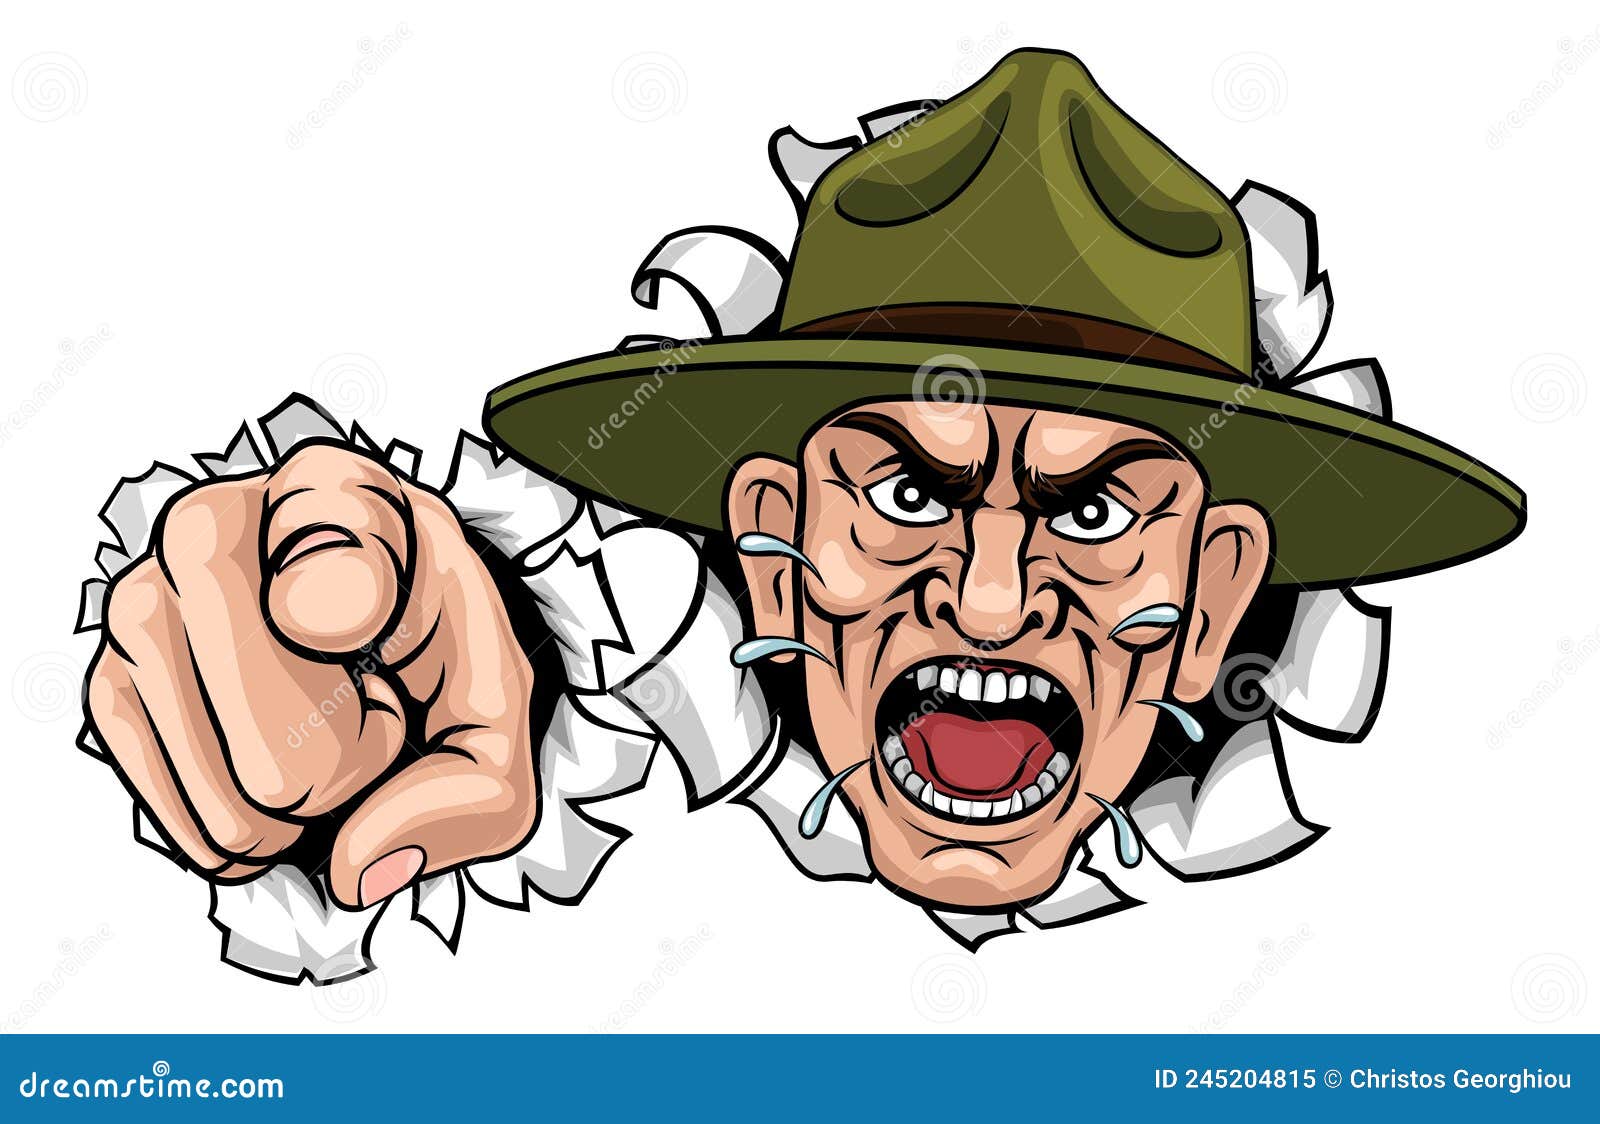 Angry Army Bootcamp Drill Sergeant Cartoon Stock Vector - Illustration ...